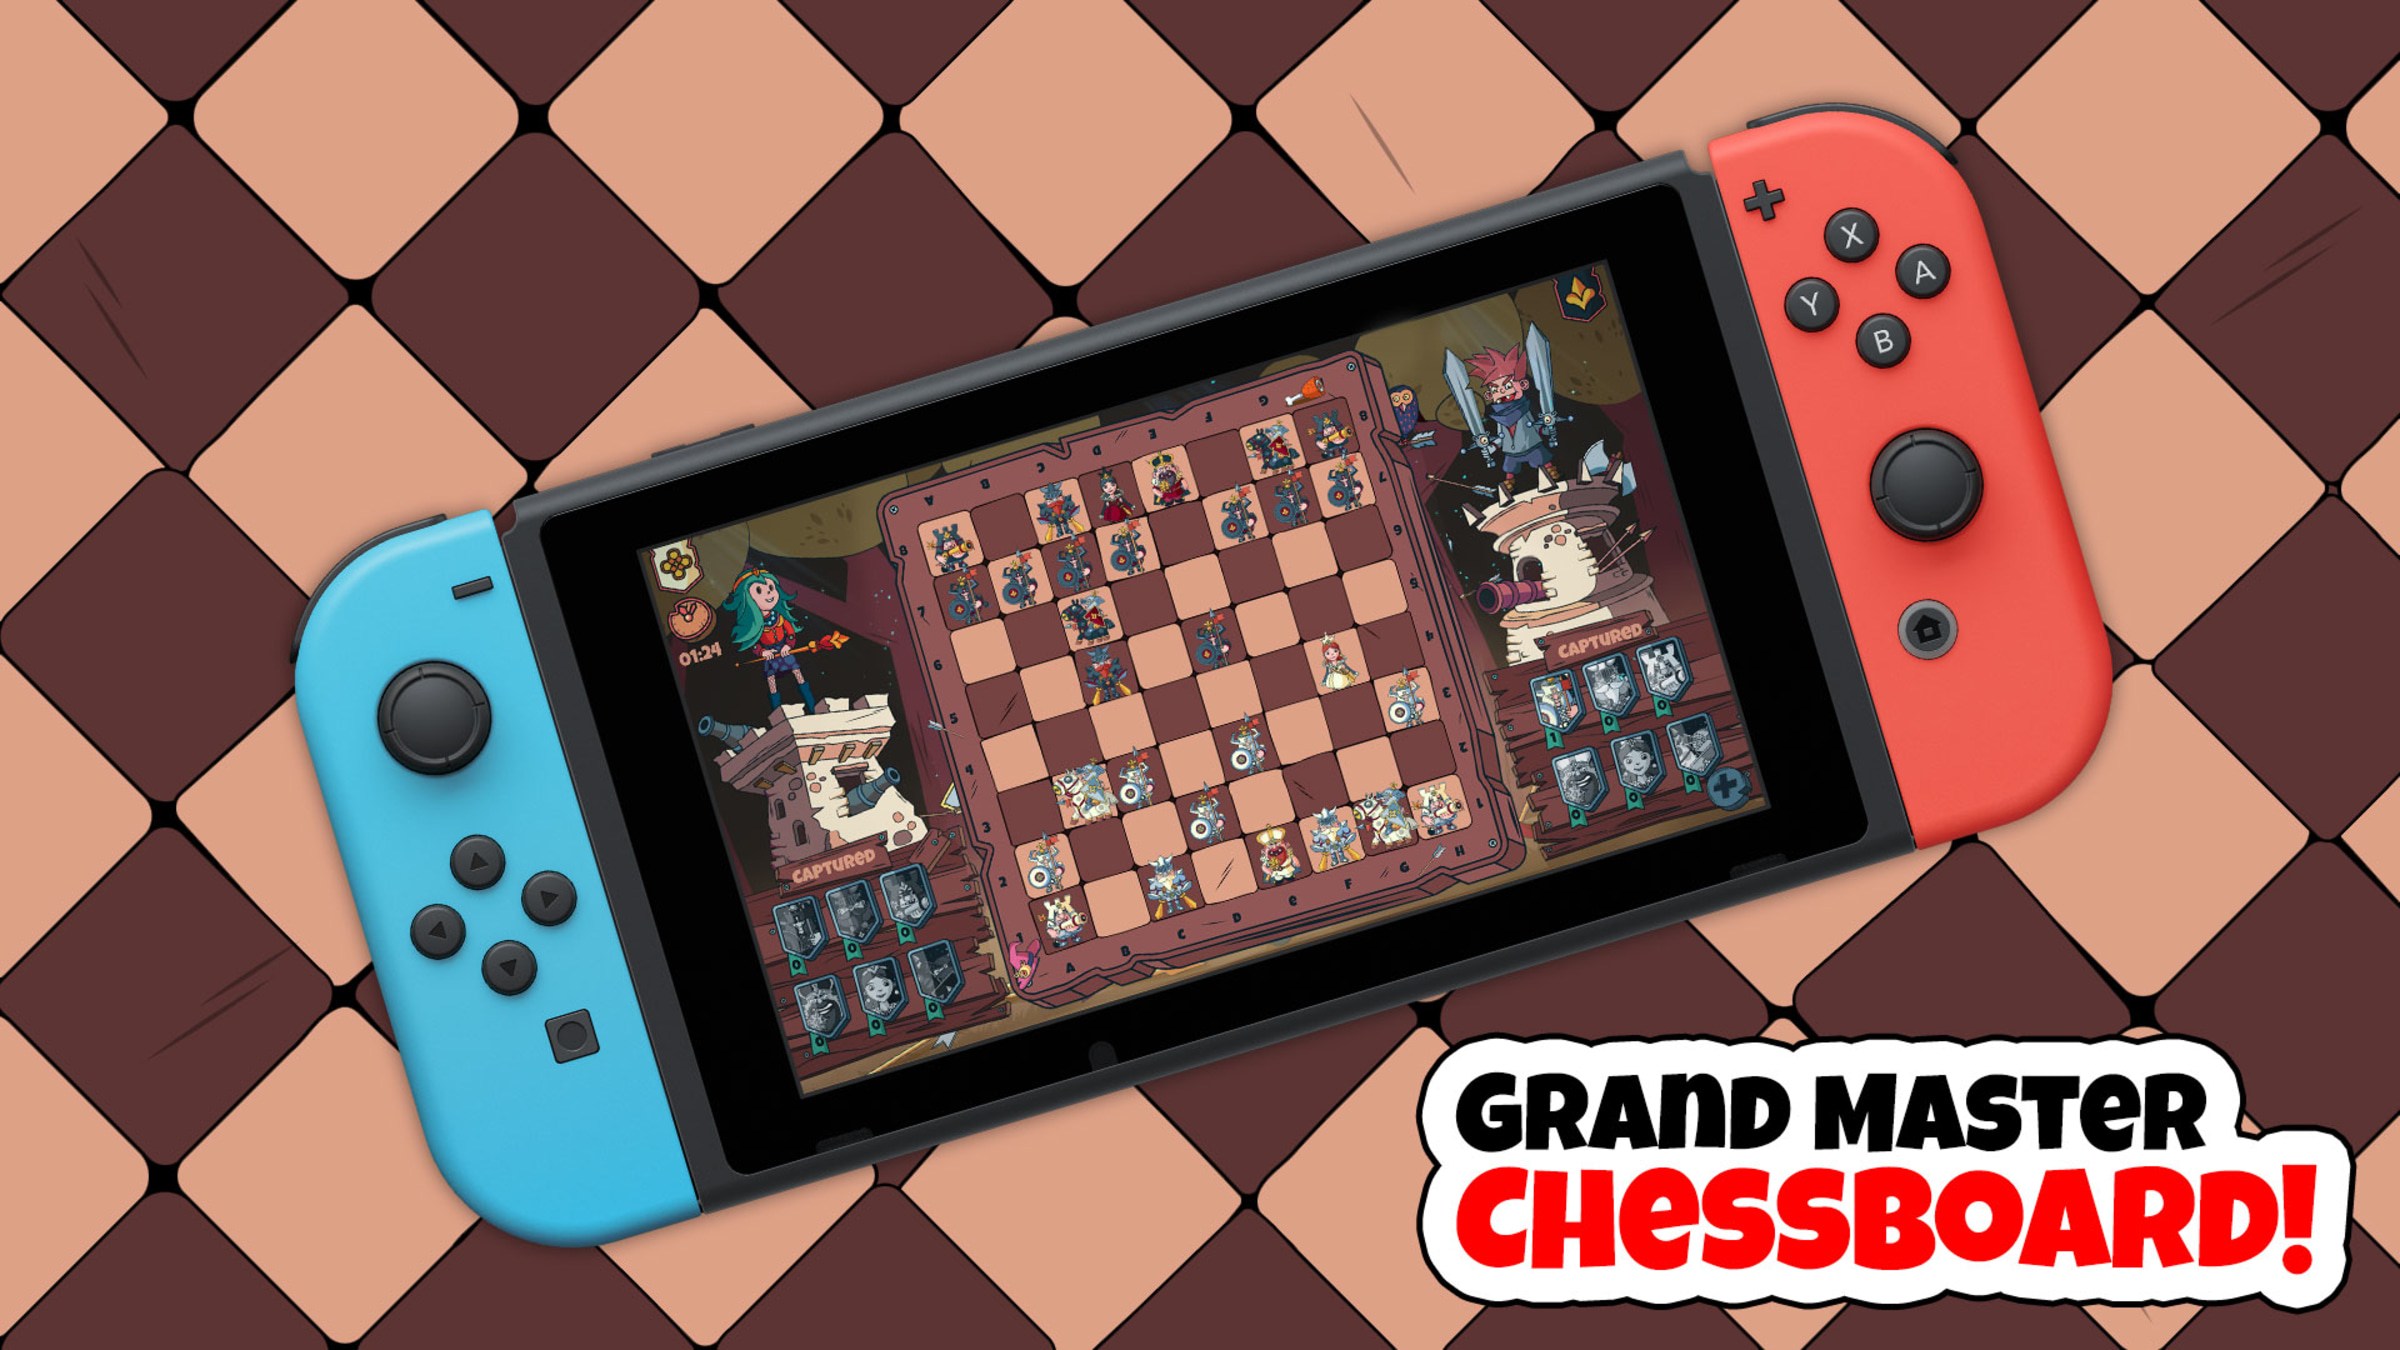 Chess Openings and Book Moves for Nintendo Switch - Nintendo Official Site